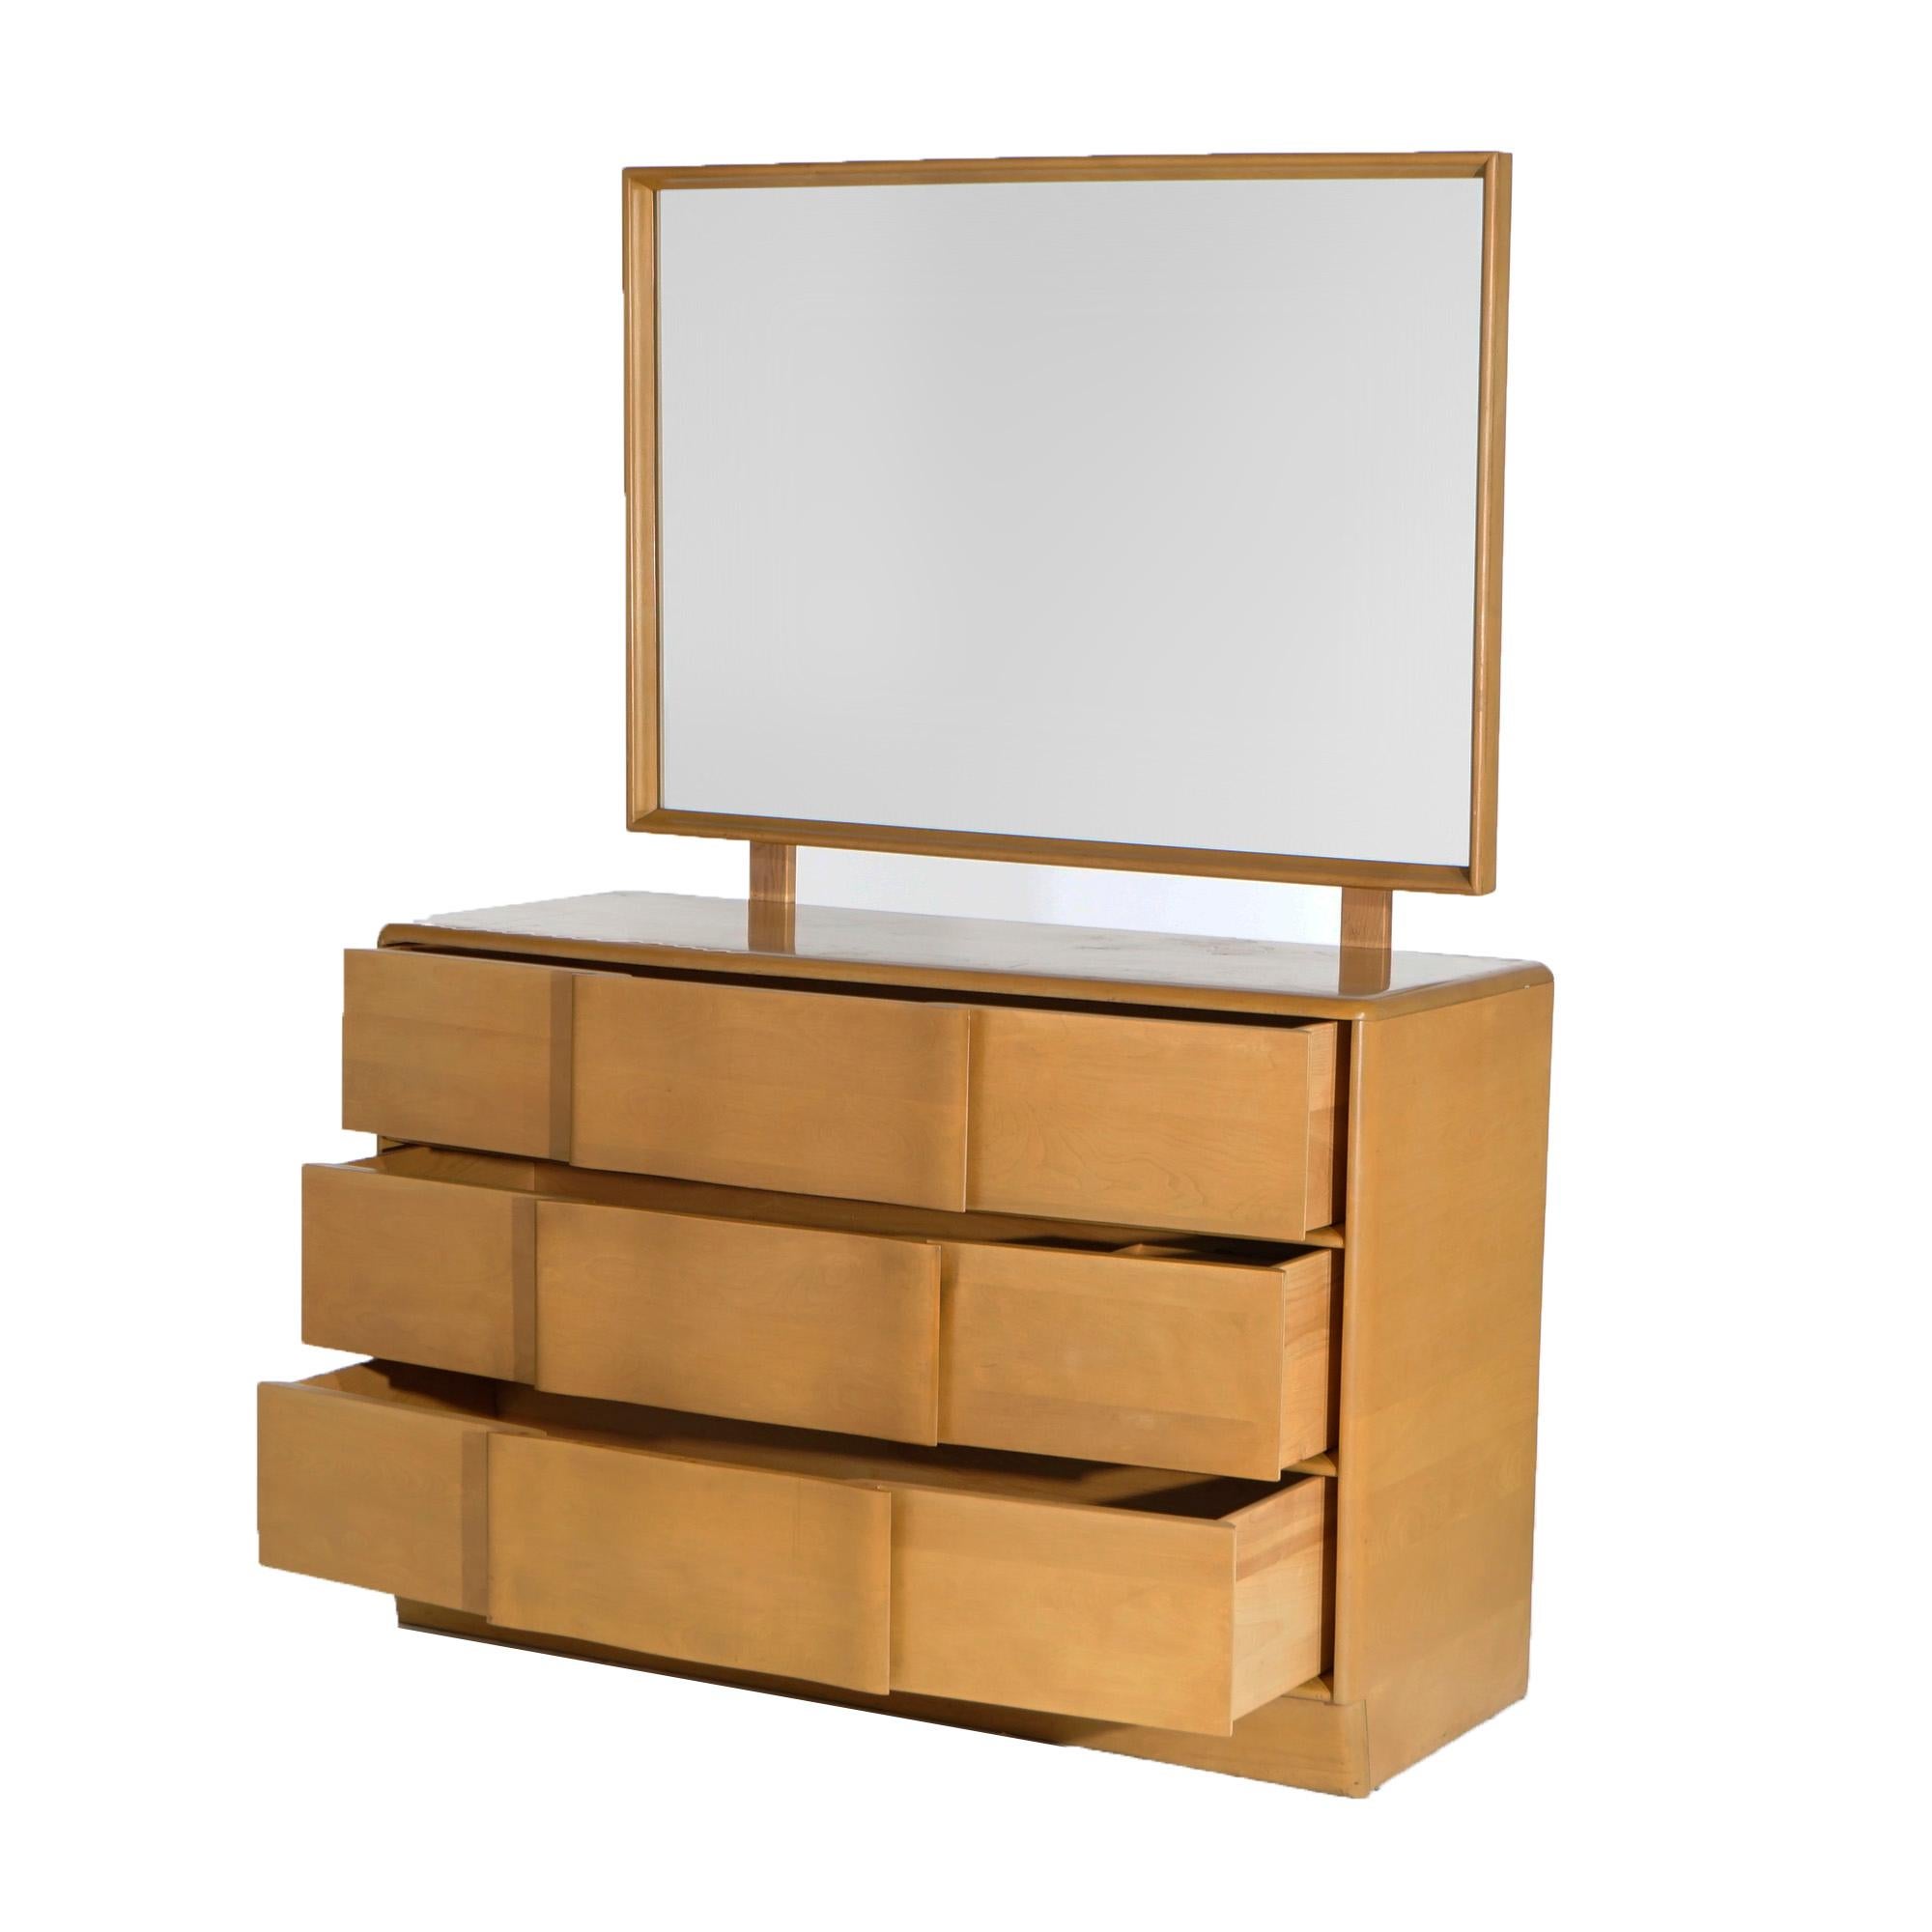 Mid Century Modern Heywood Wakefield Dresser & Mirror offers Birch Construction in Wheat Finish with Three Long Drawers, Circa 1950

Measures- 62.75''H x 45.75''W x 19.25''D